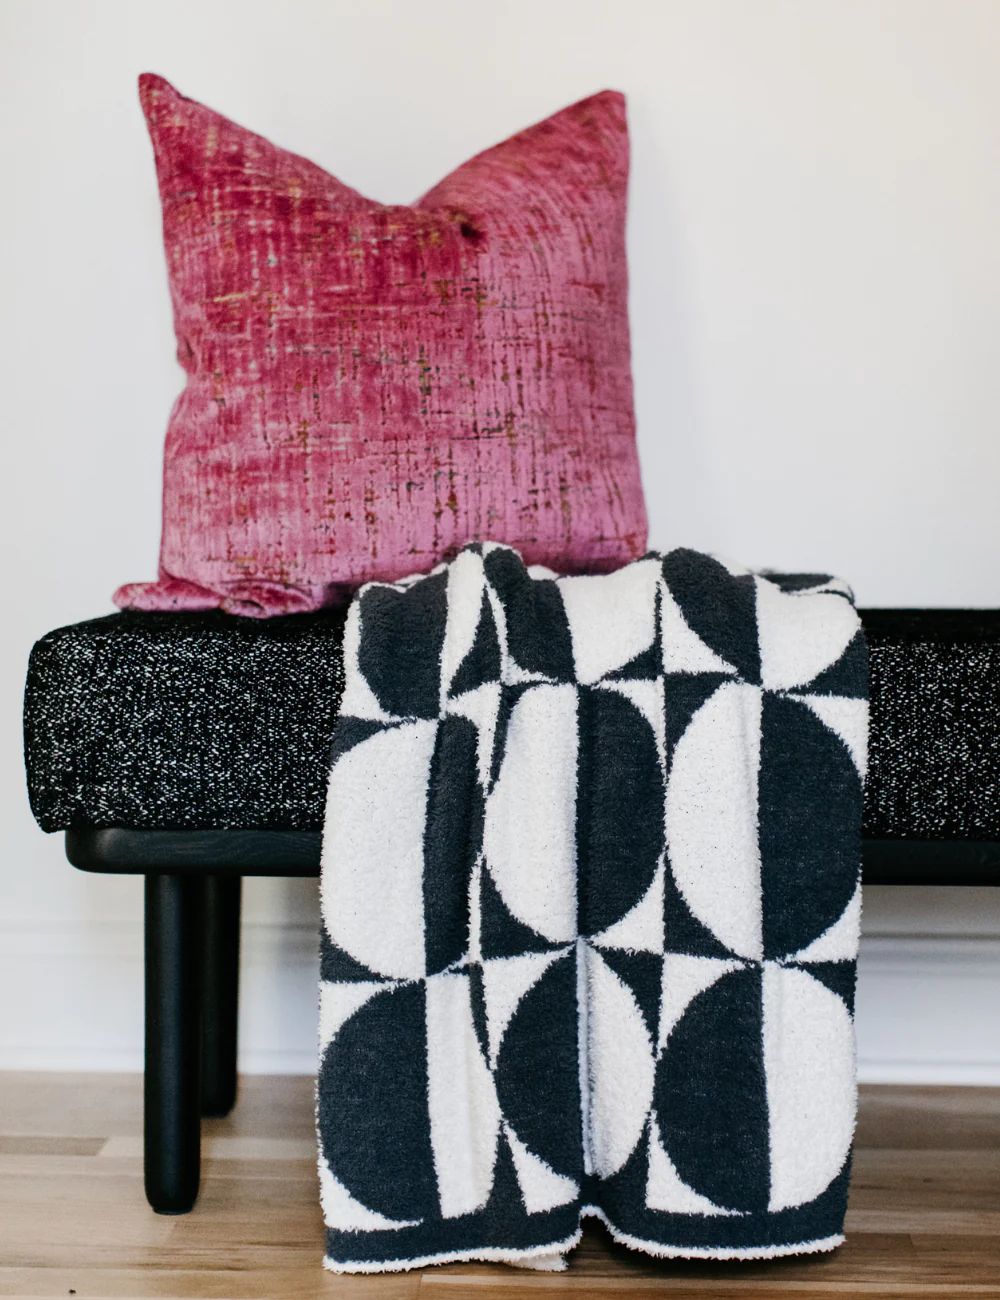 TSC x Tia Booth: Mod Circle Buttery Blanket | The Styled Collection